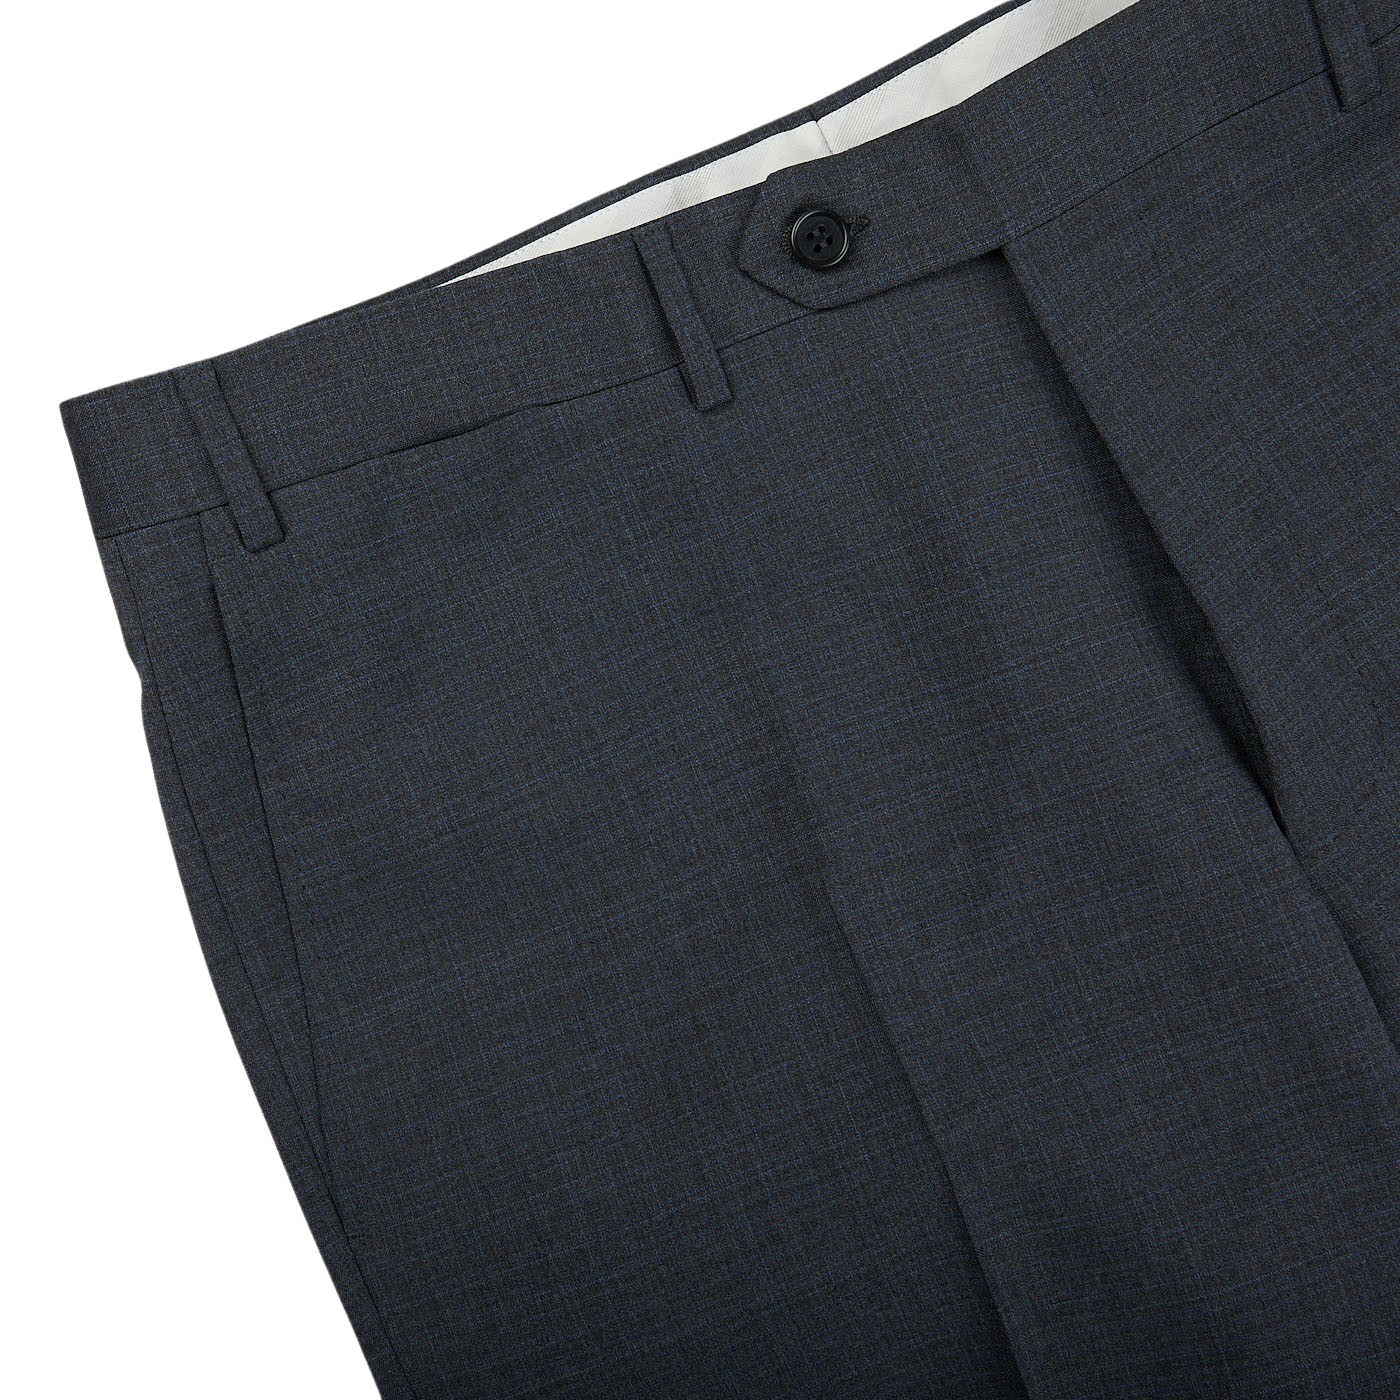 A close up of a Canali Grey Blue Melange Checked Wool Trousers suit pants.